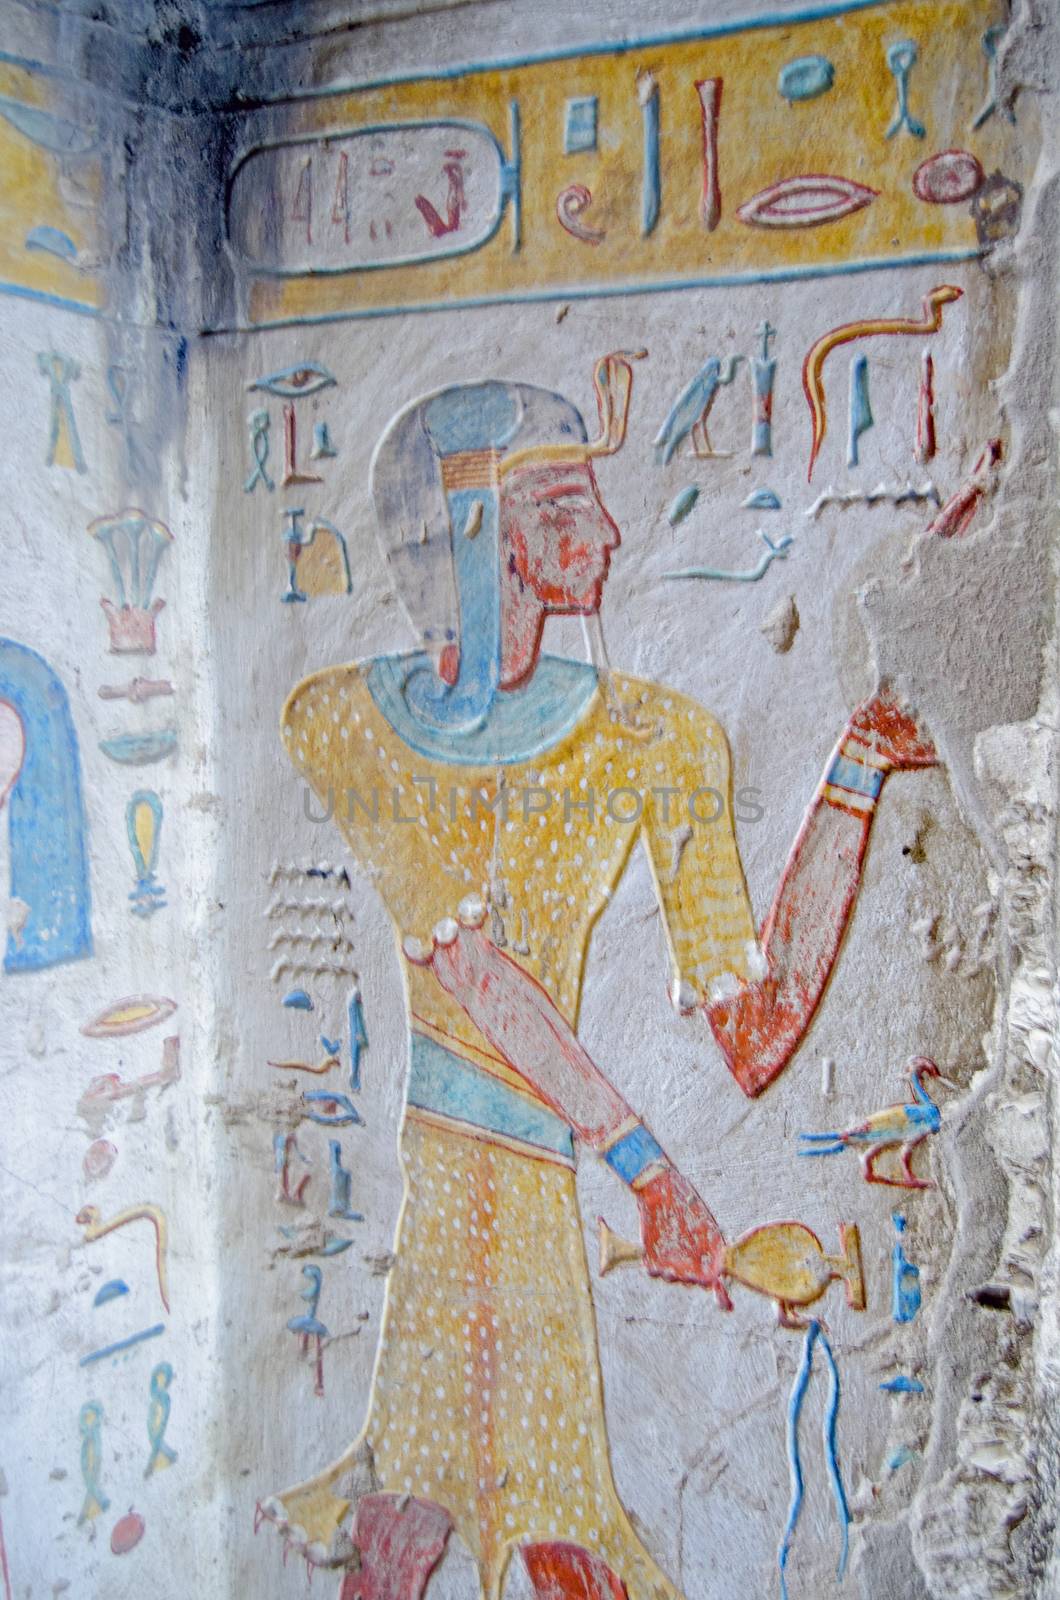 Ancient Egyptian painting on the wall of the tomb of Prince Titi wearing the skin of a leopard.  Ancient Egyptian tomb in the Valley of the Queens on the West Bank of the Nile at Luxor, Egypt.  Thousands of years old.